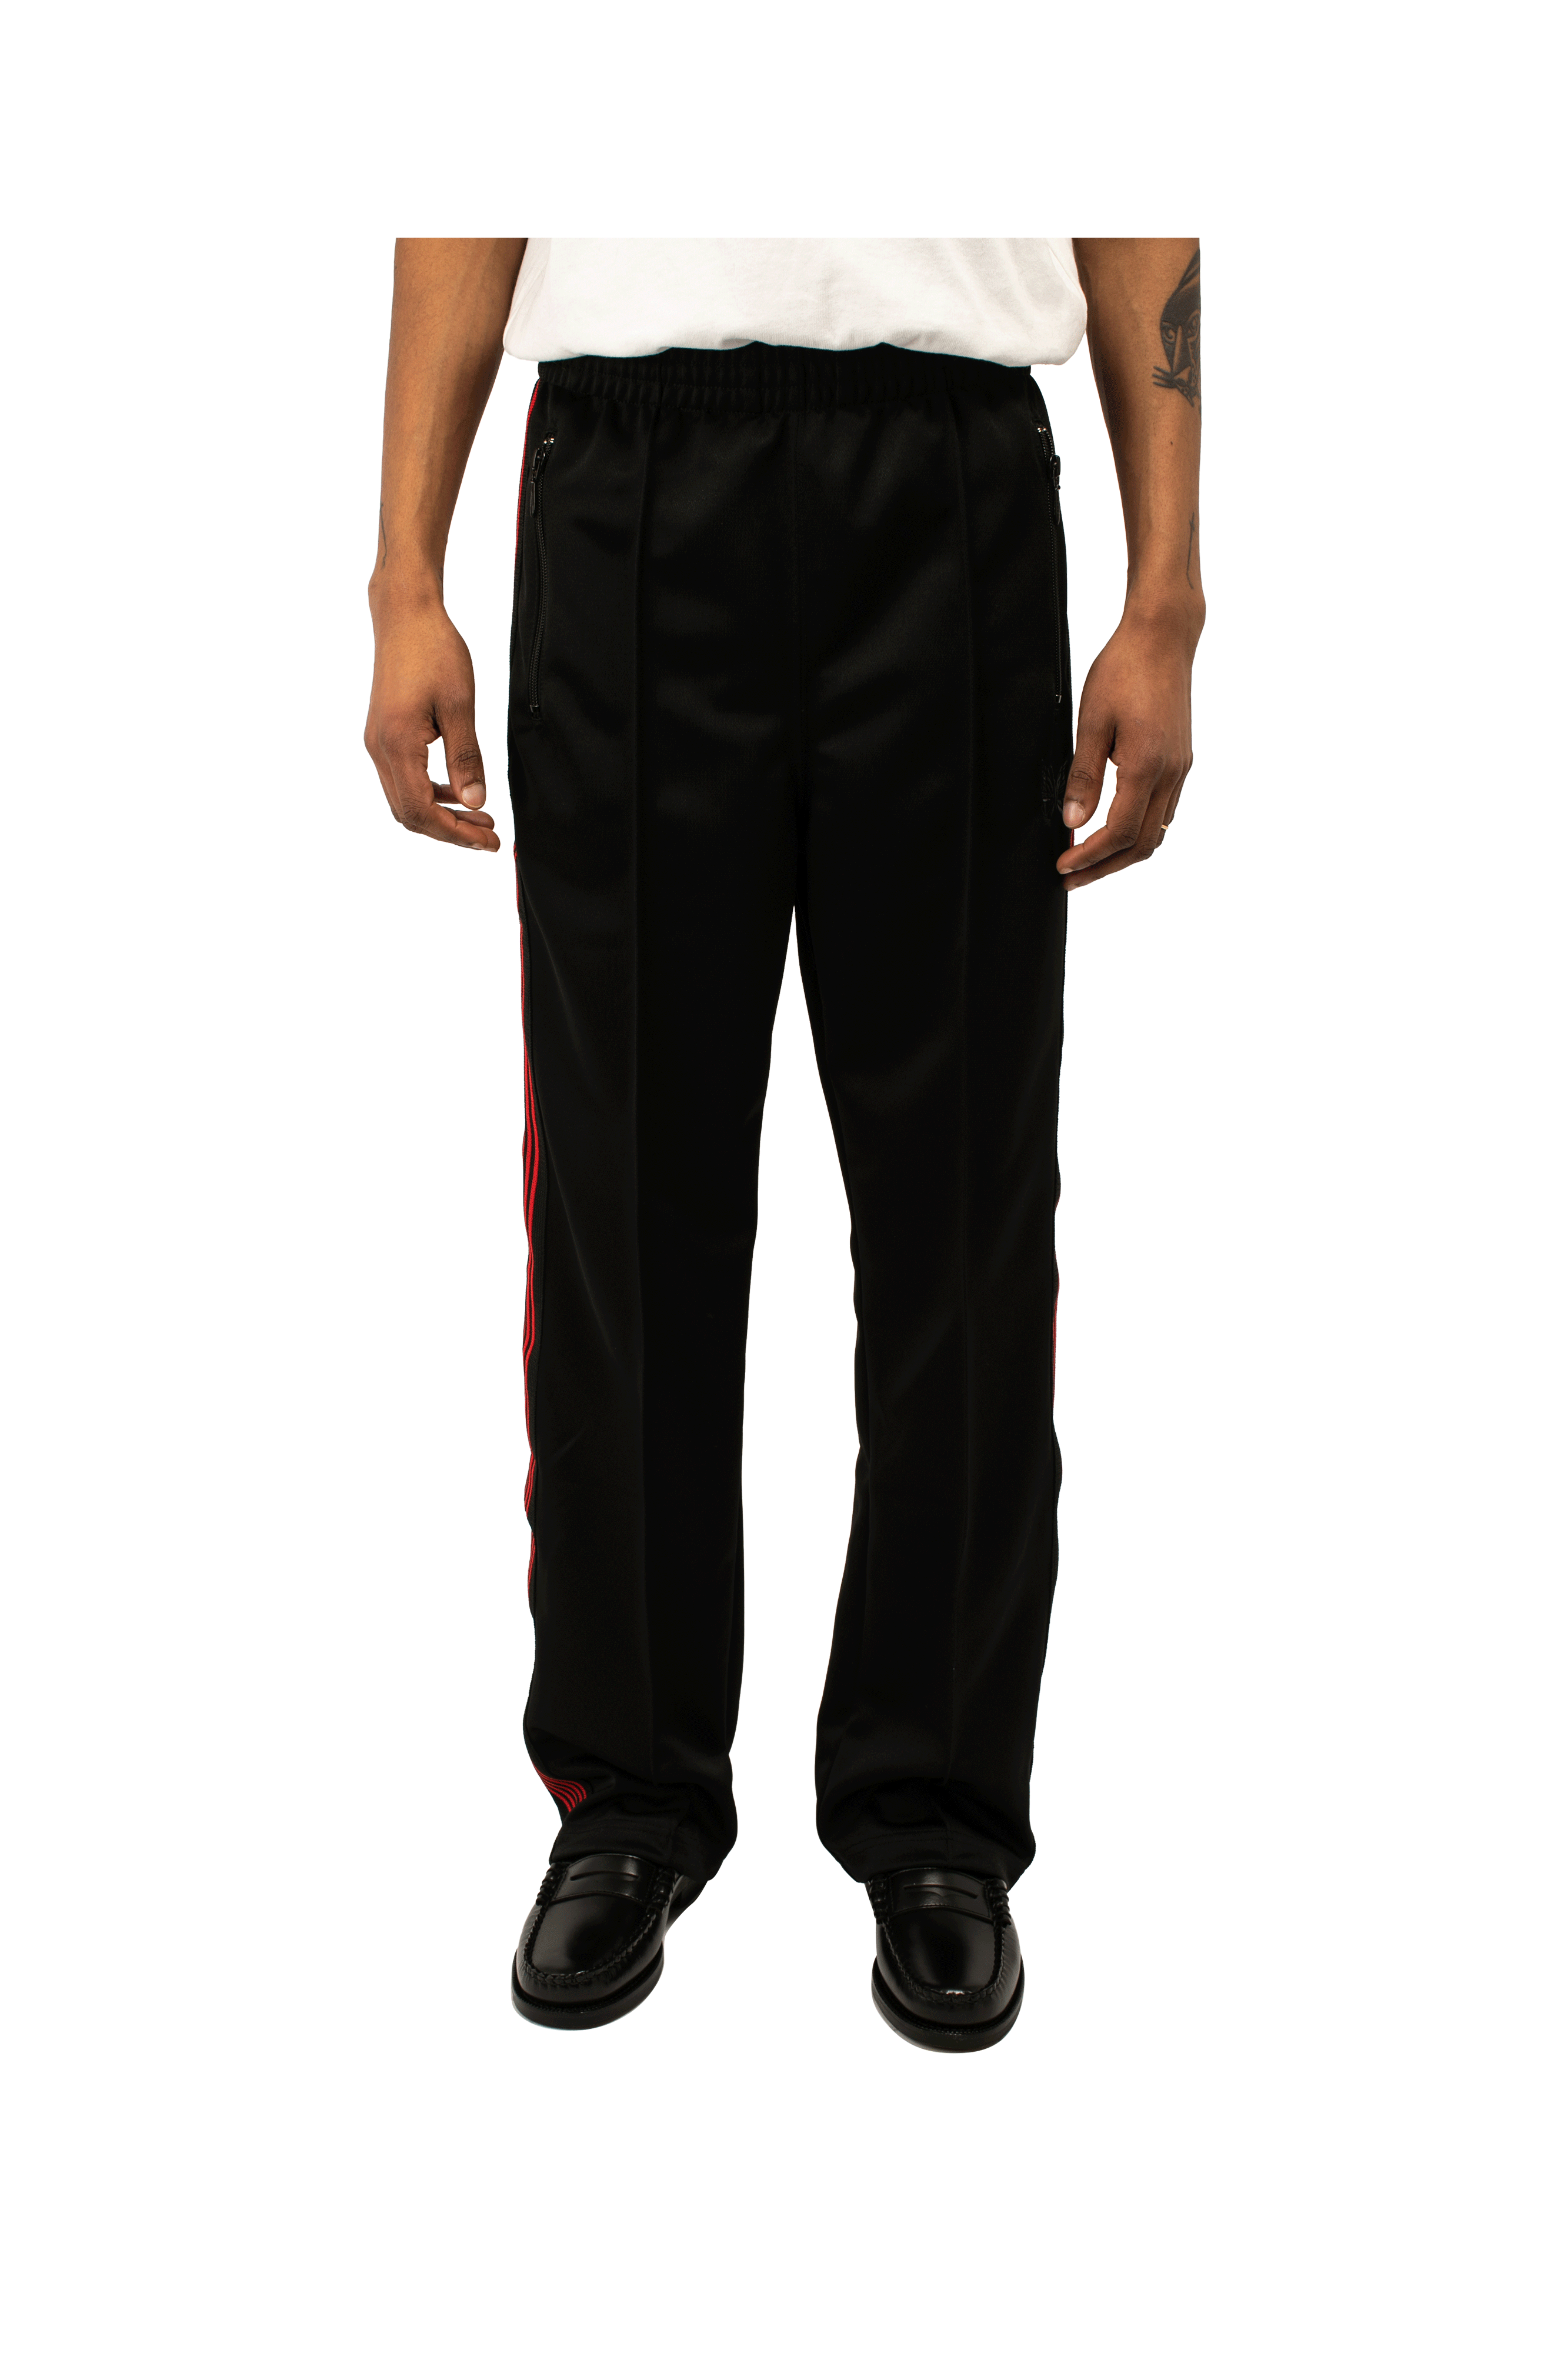 Track Pant - Polysmooth x One Block Down.